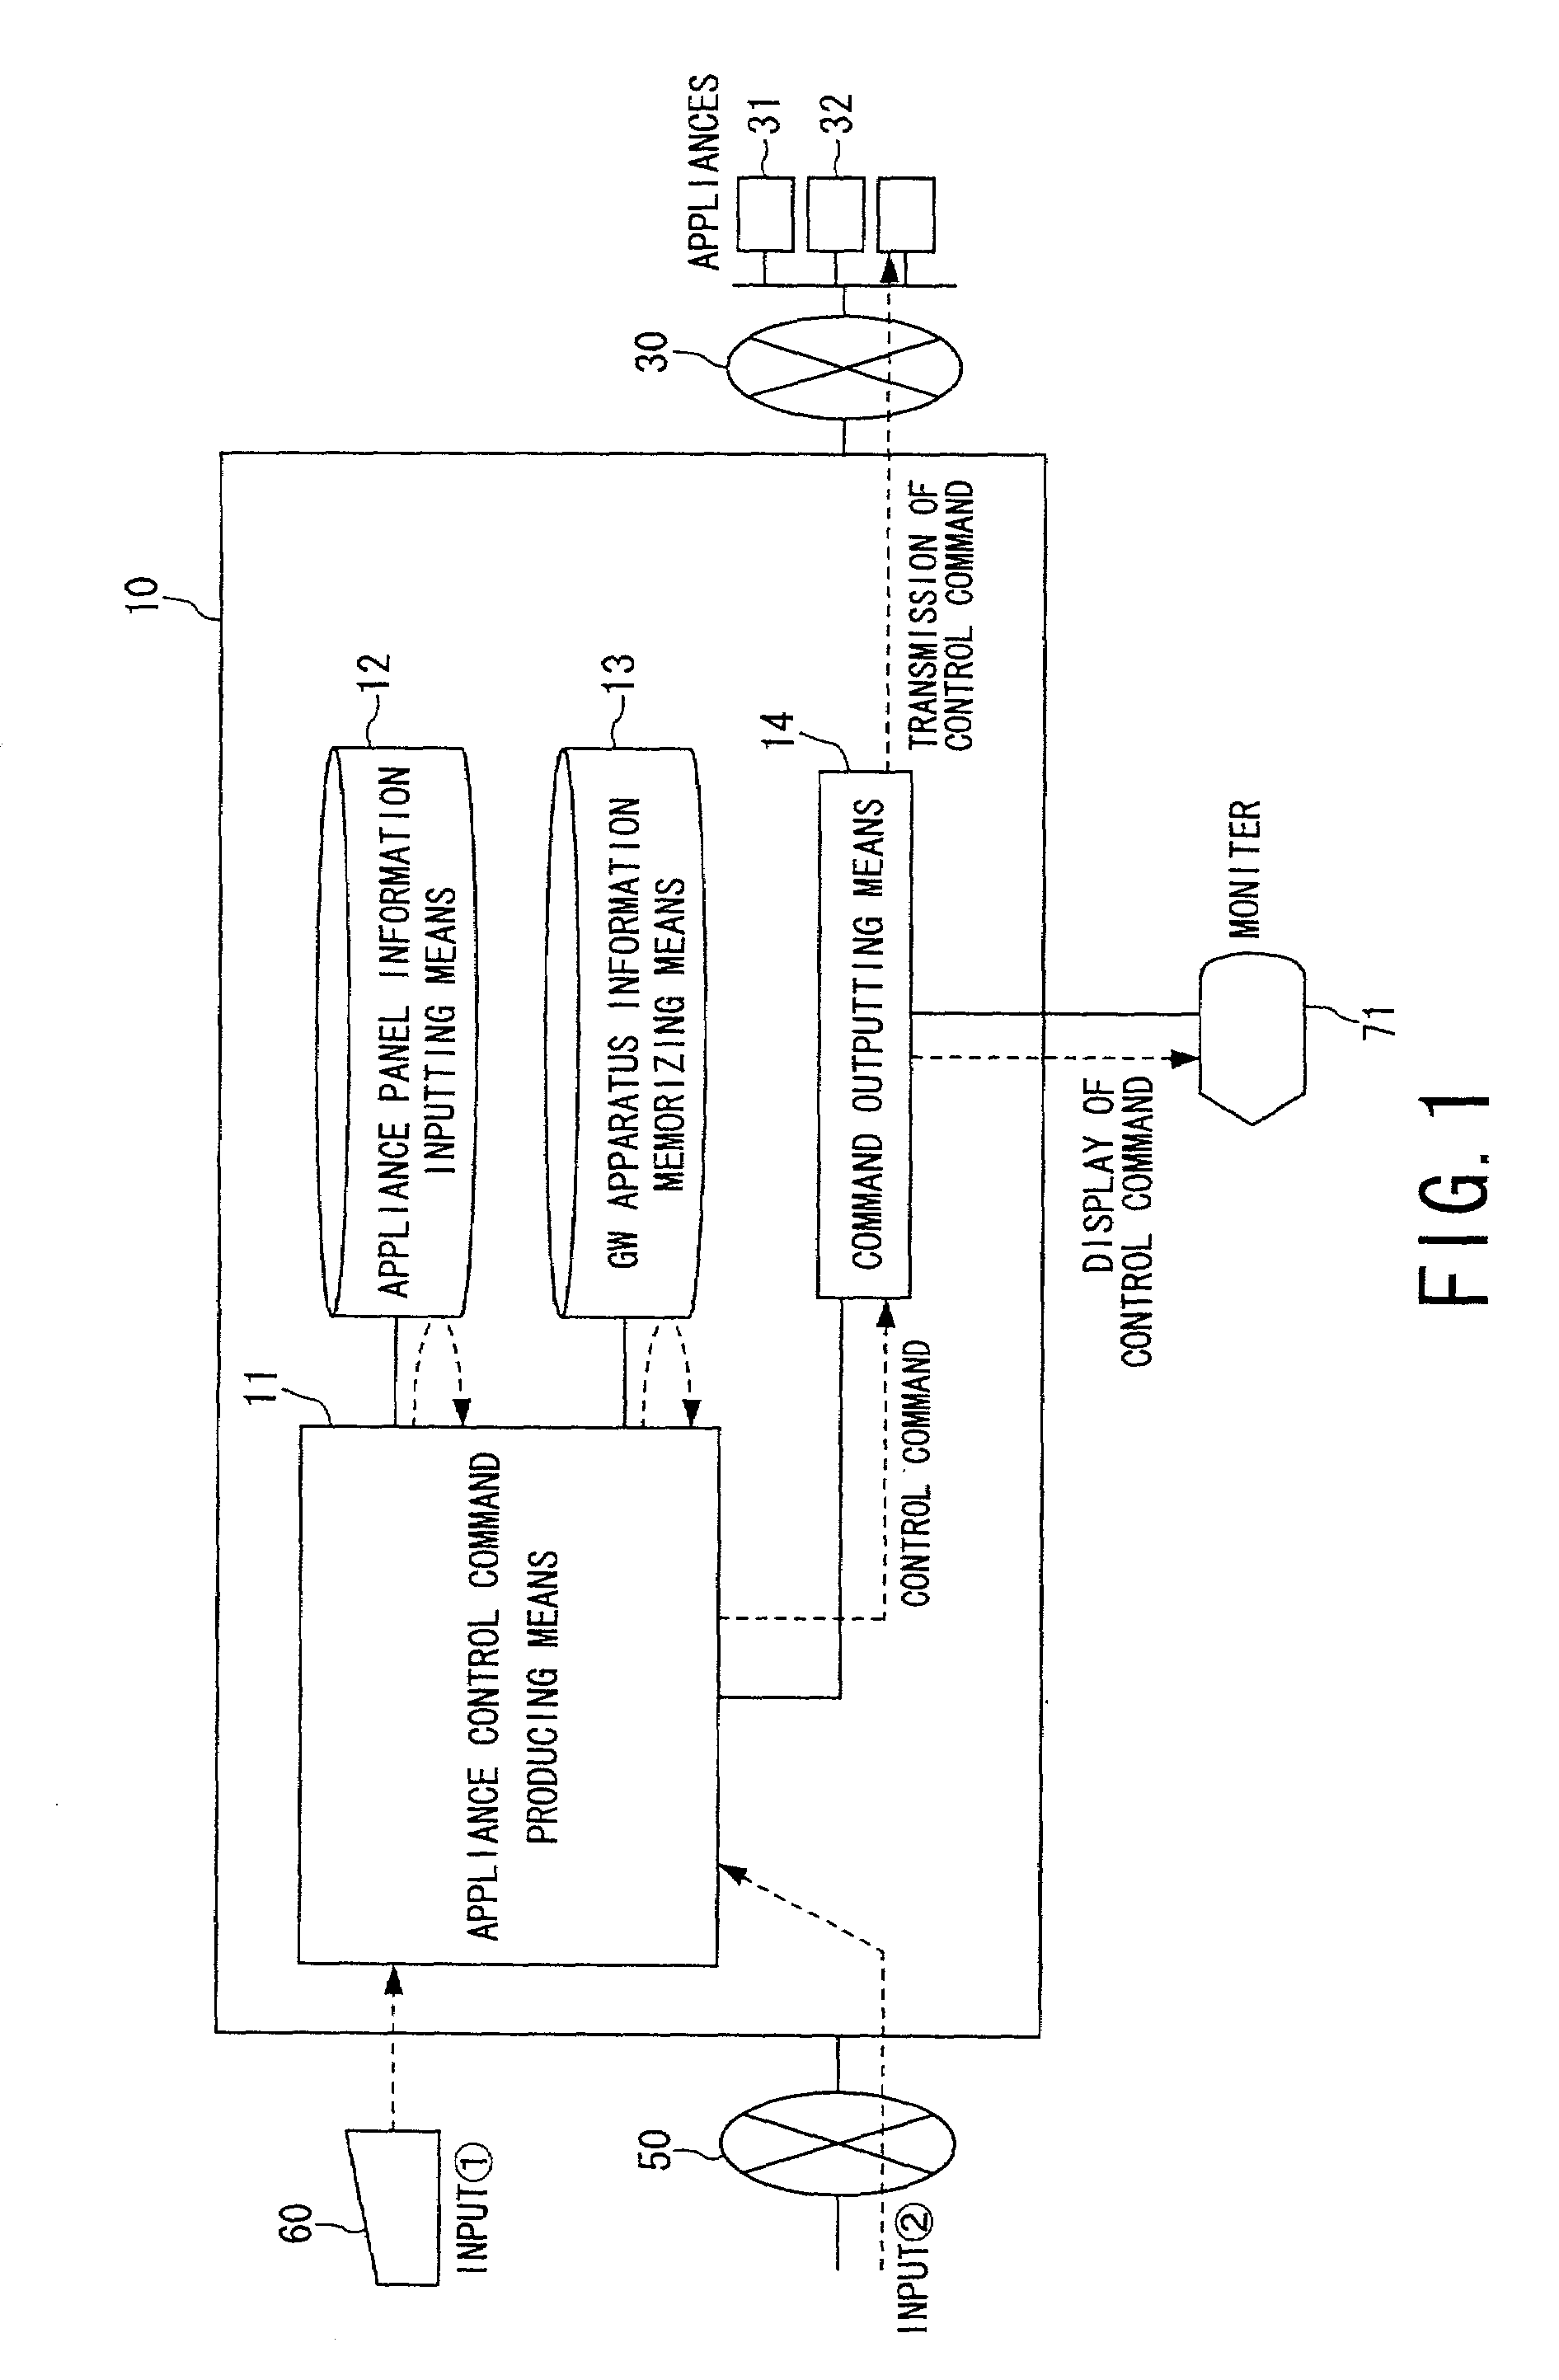 Remote control system and home gateway apparatus